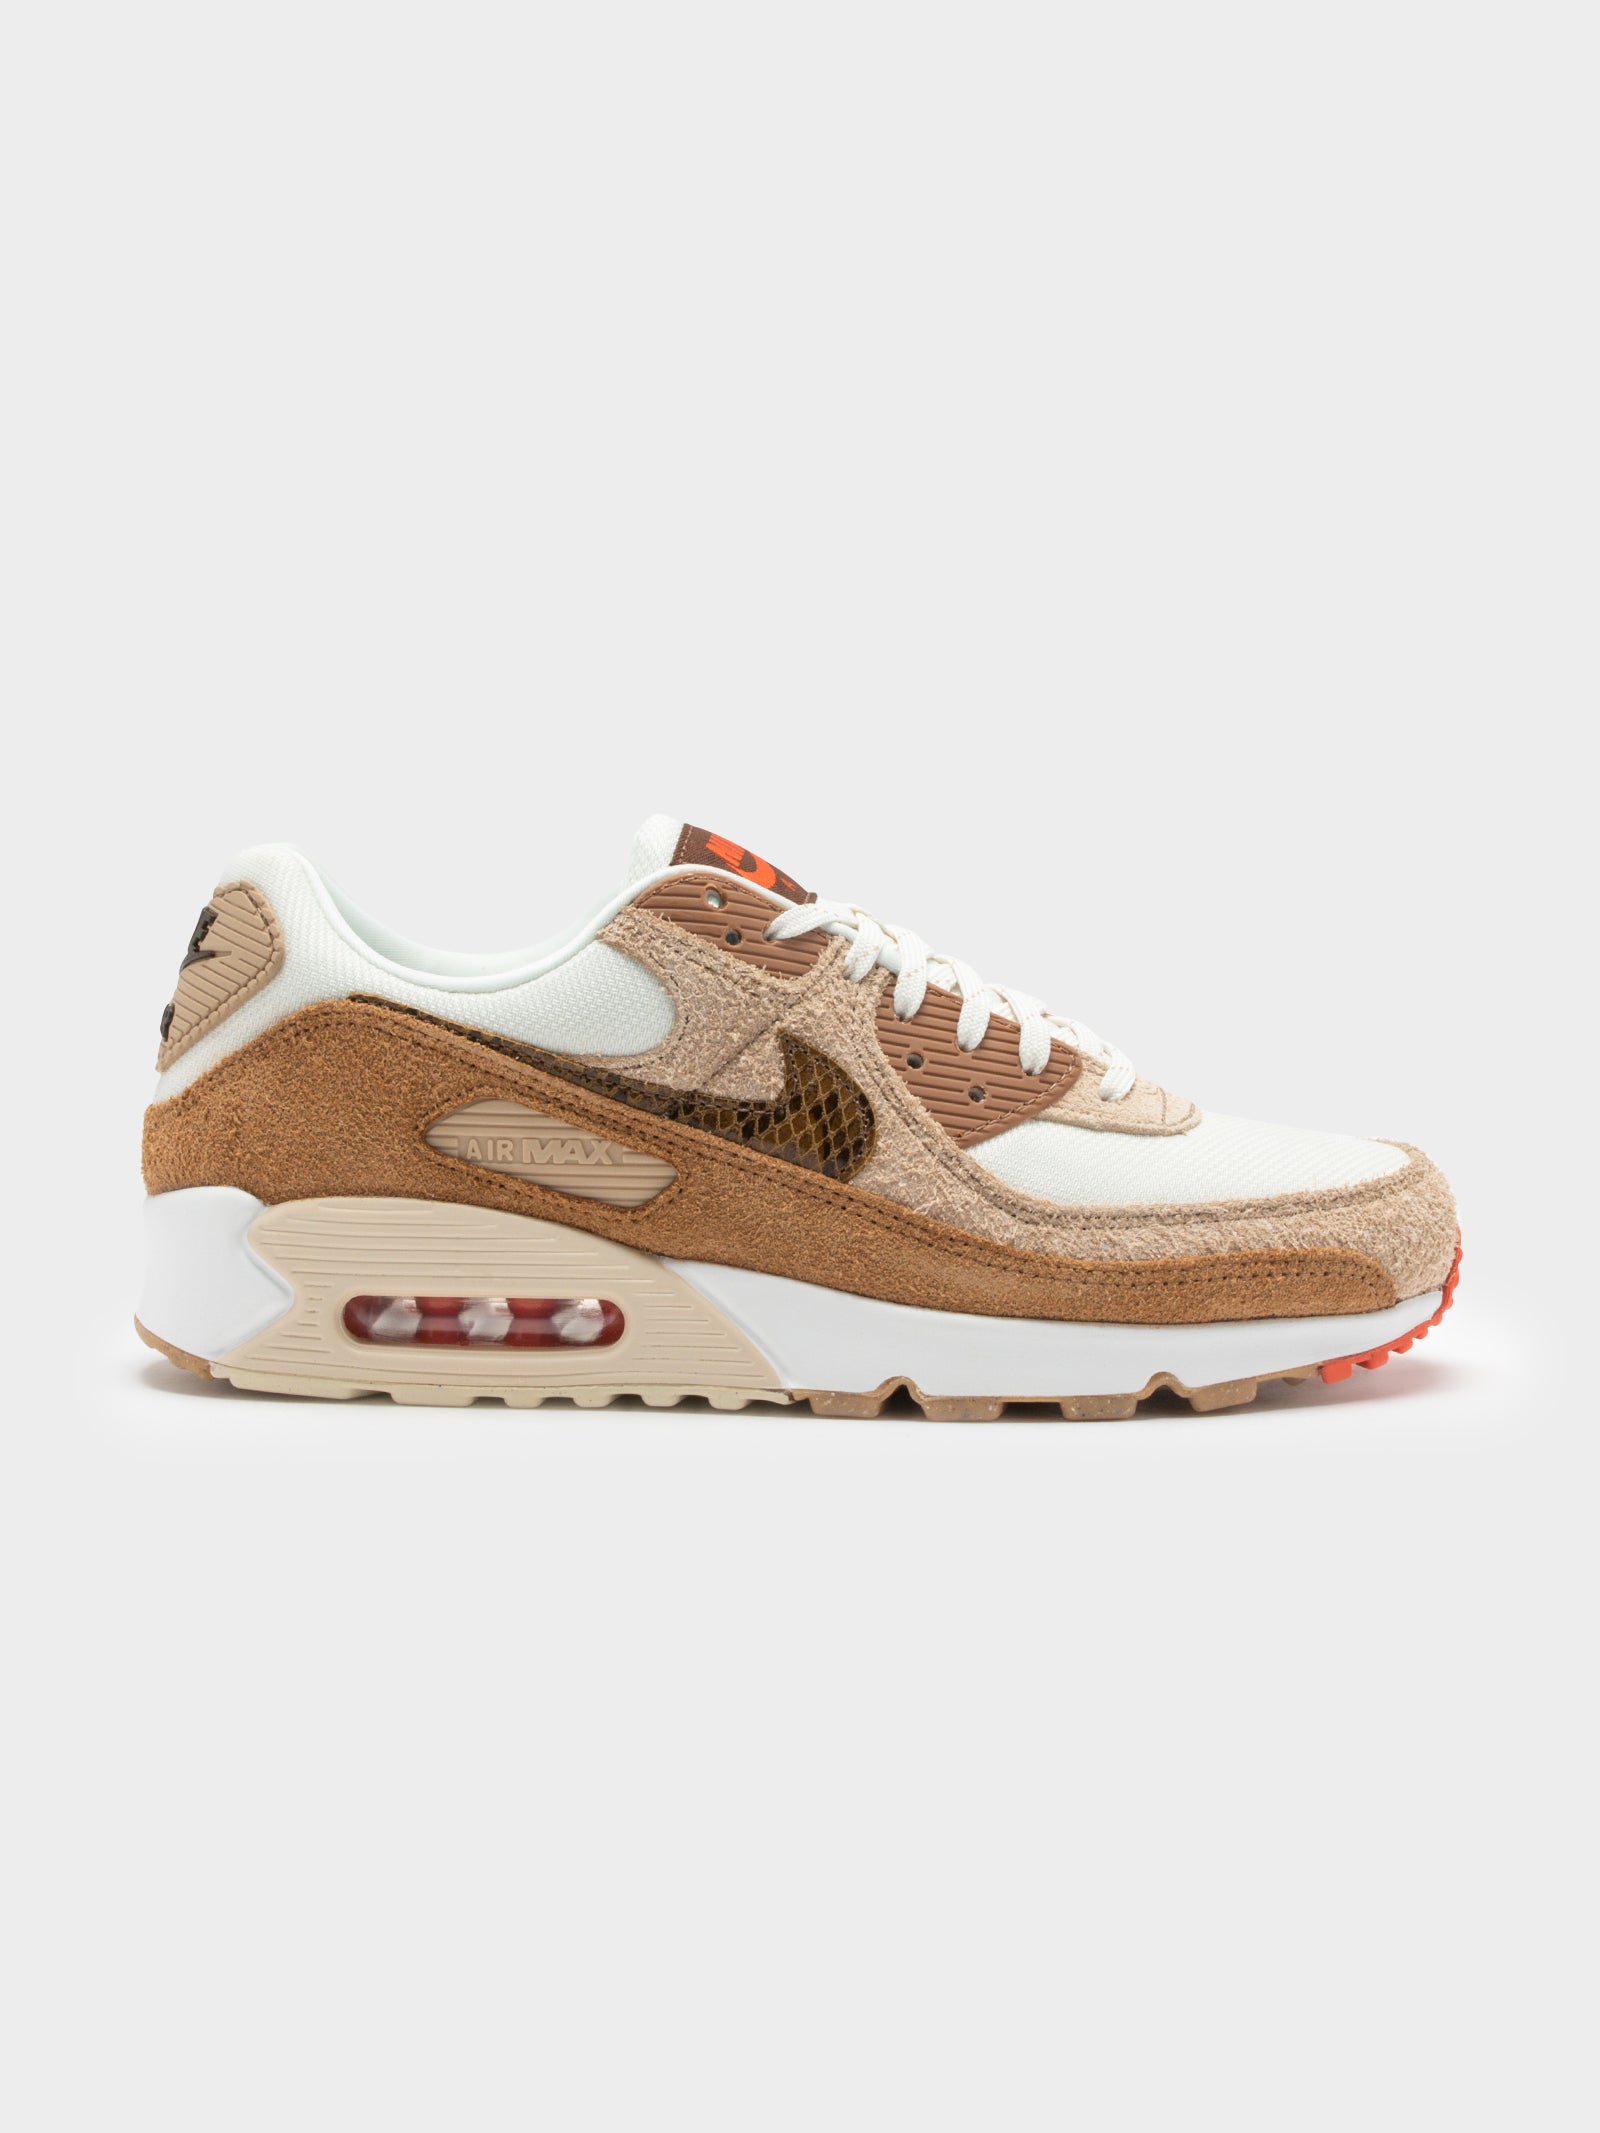 Unisex Air Max 90 SE Sneakers in Pale Ivory & Picante Red - Glue Store